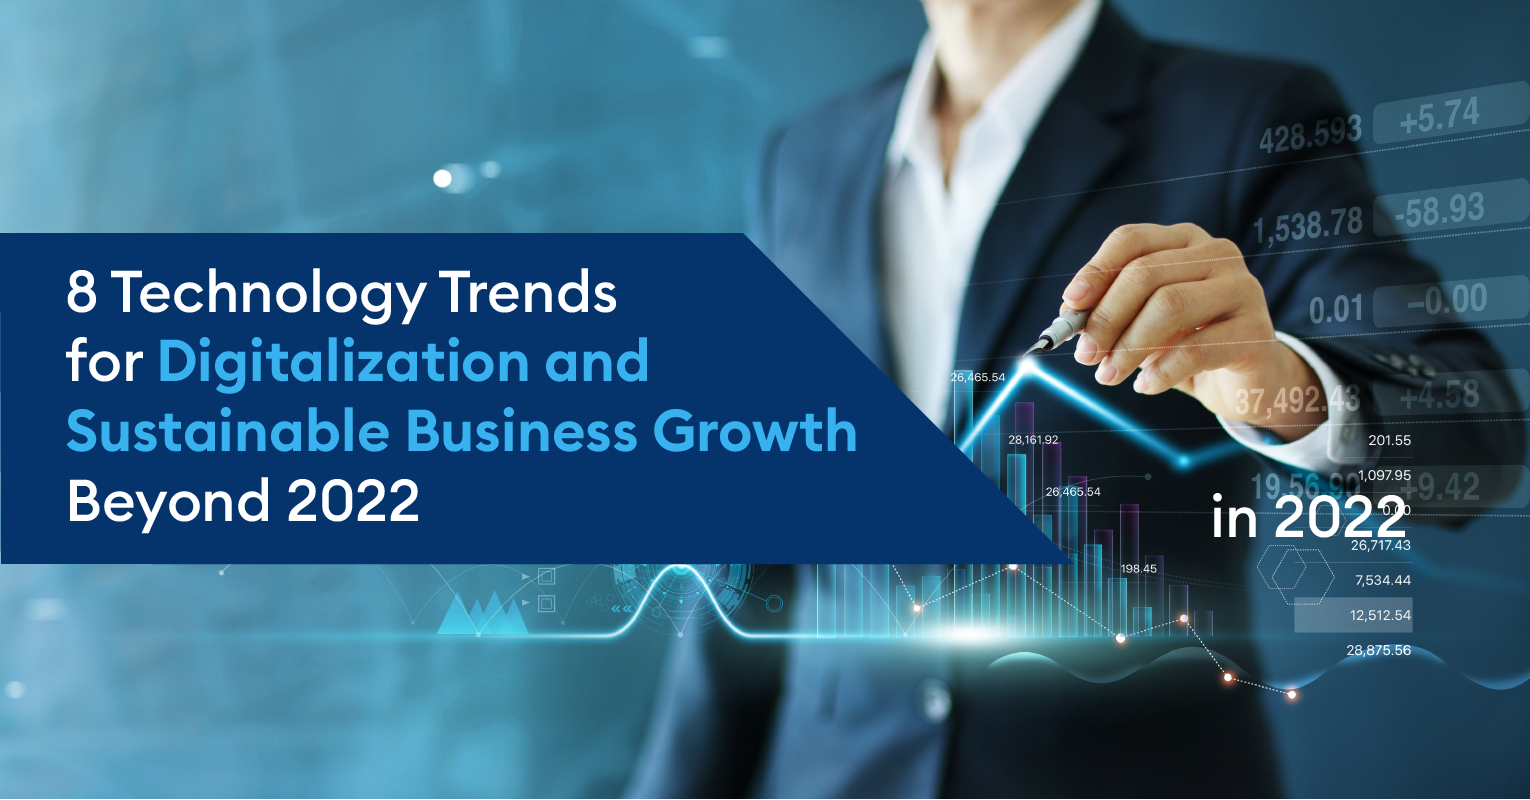 8 Technology Trends for Digitalization and Sustainable Business Growth Beyond 2022